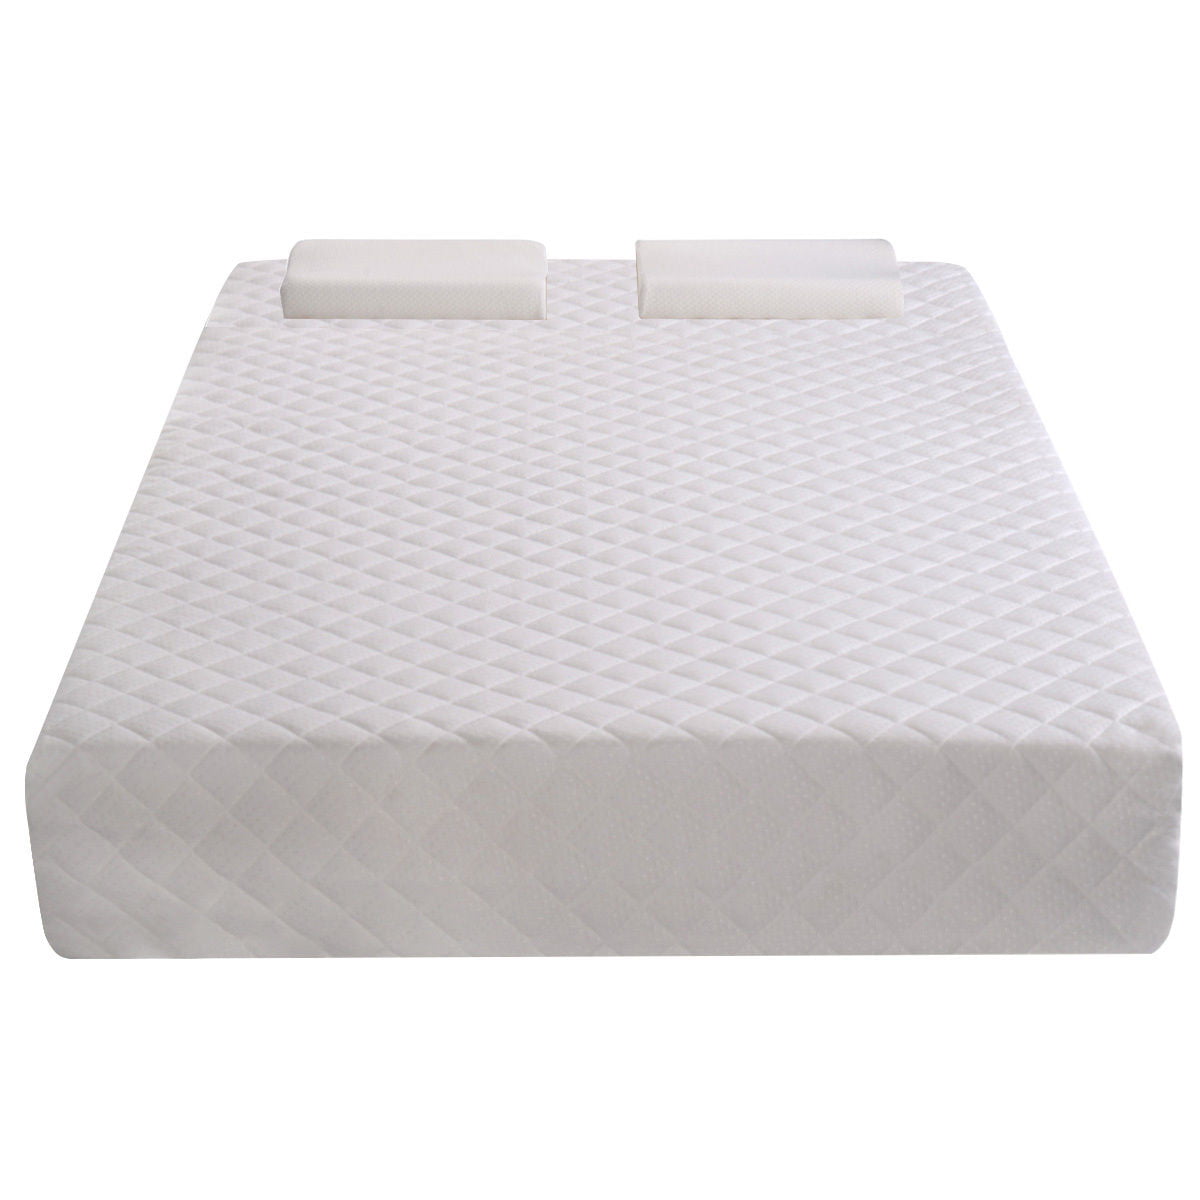 Gymax Twin Size 10 Inch Memory Foam Mattress Pad With 2 Contoured 